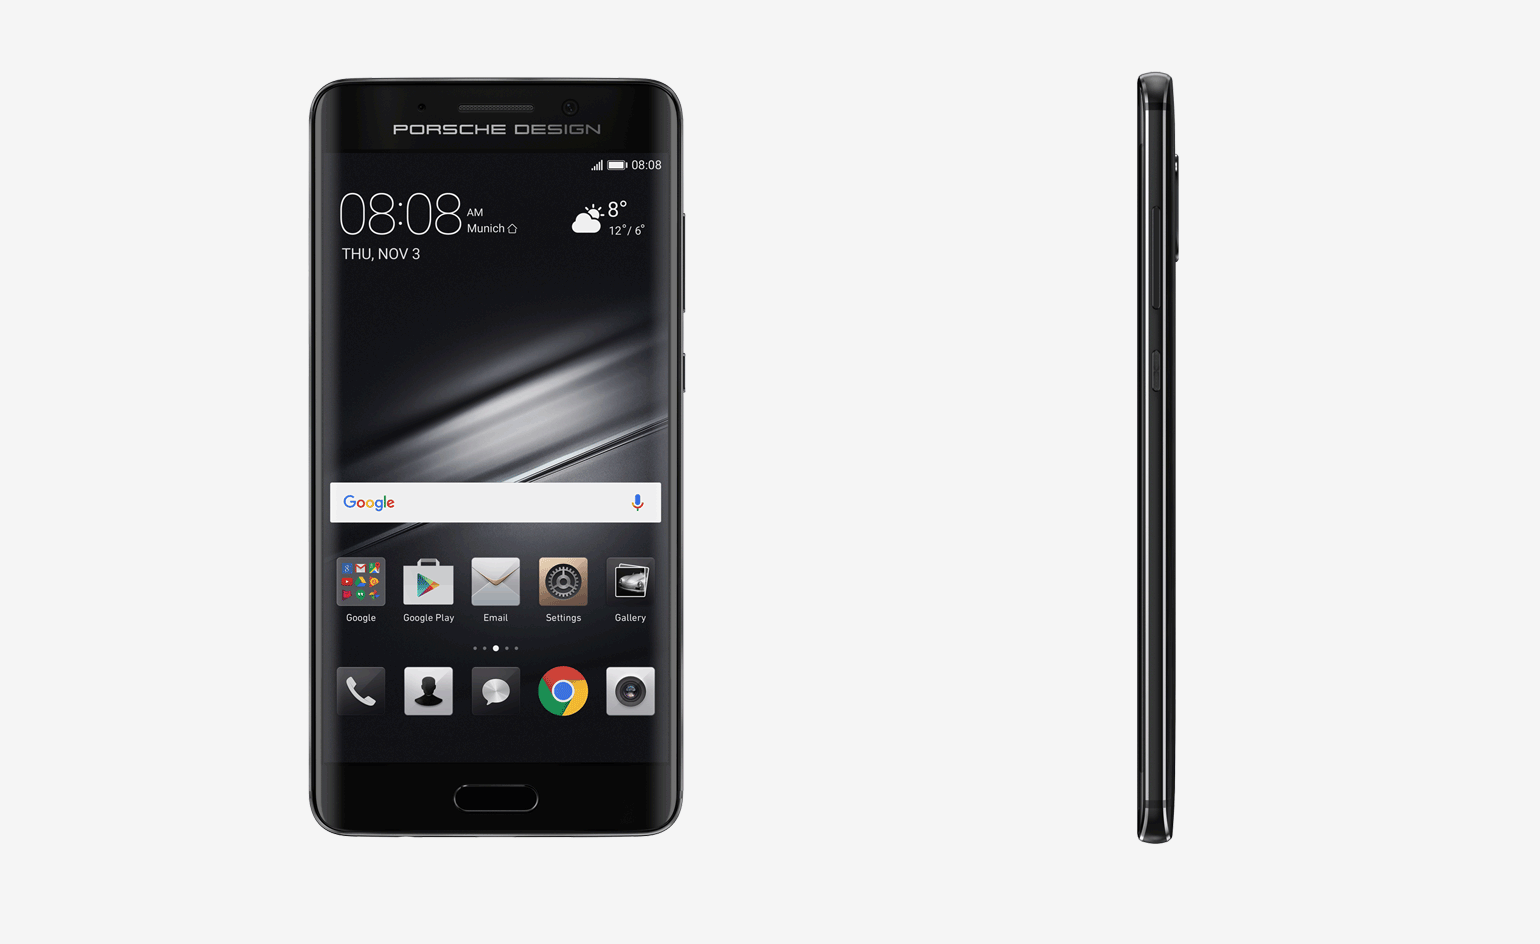 Huawei partners with Porsche Design and Leica on new smartphone